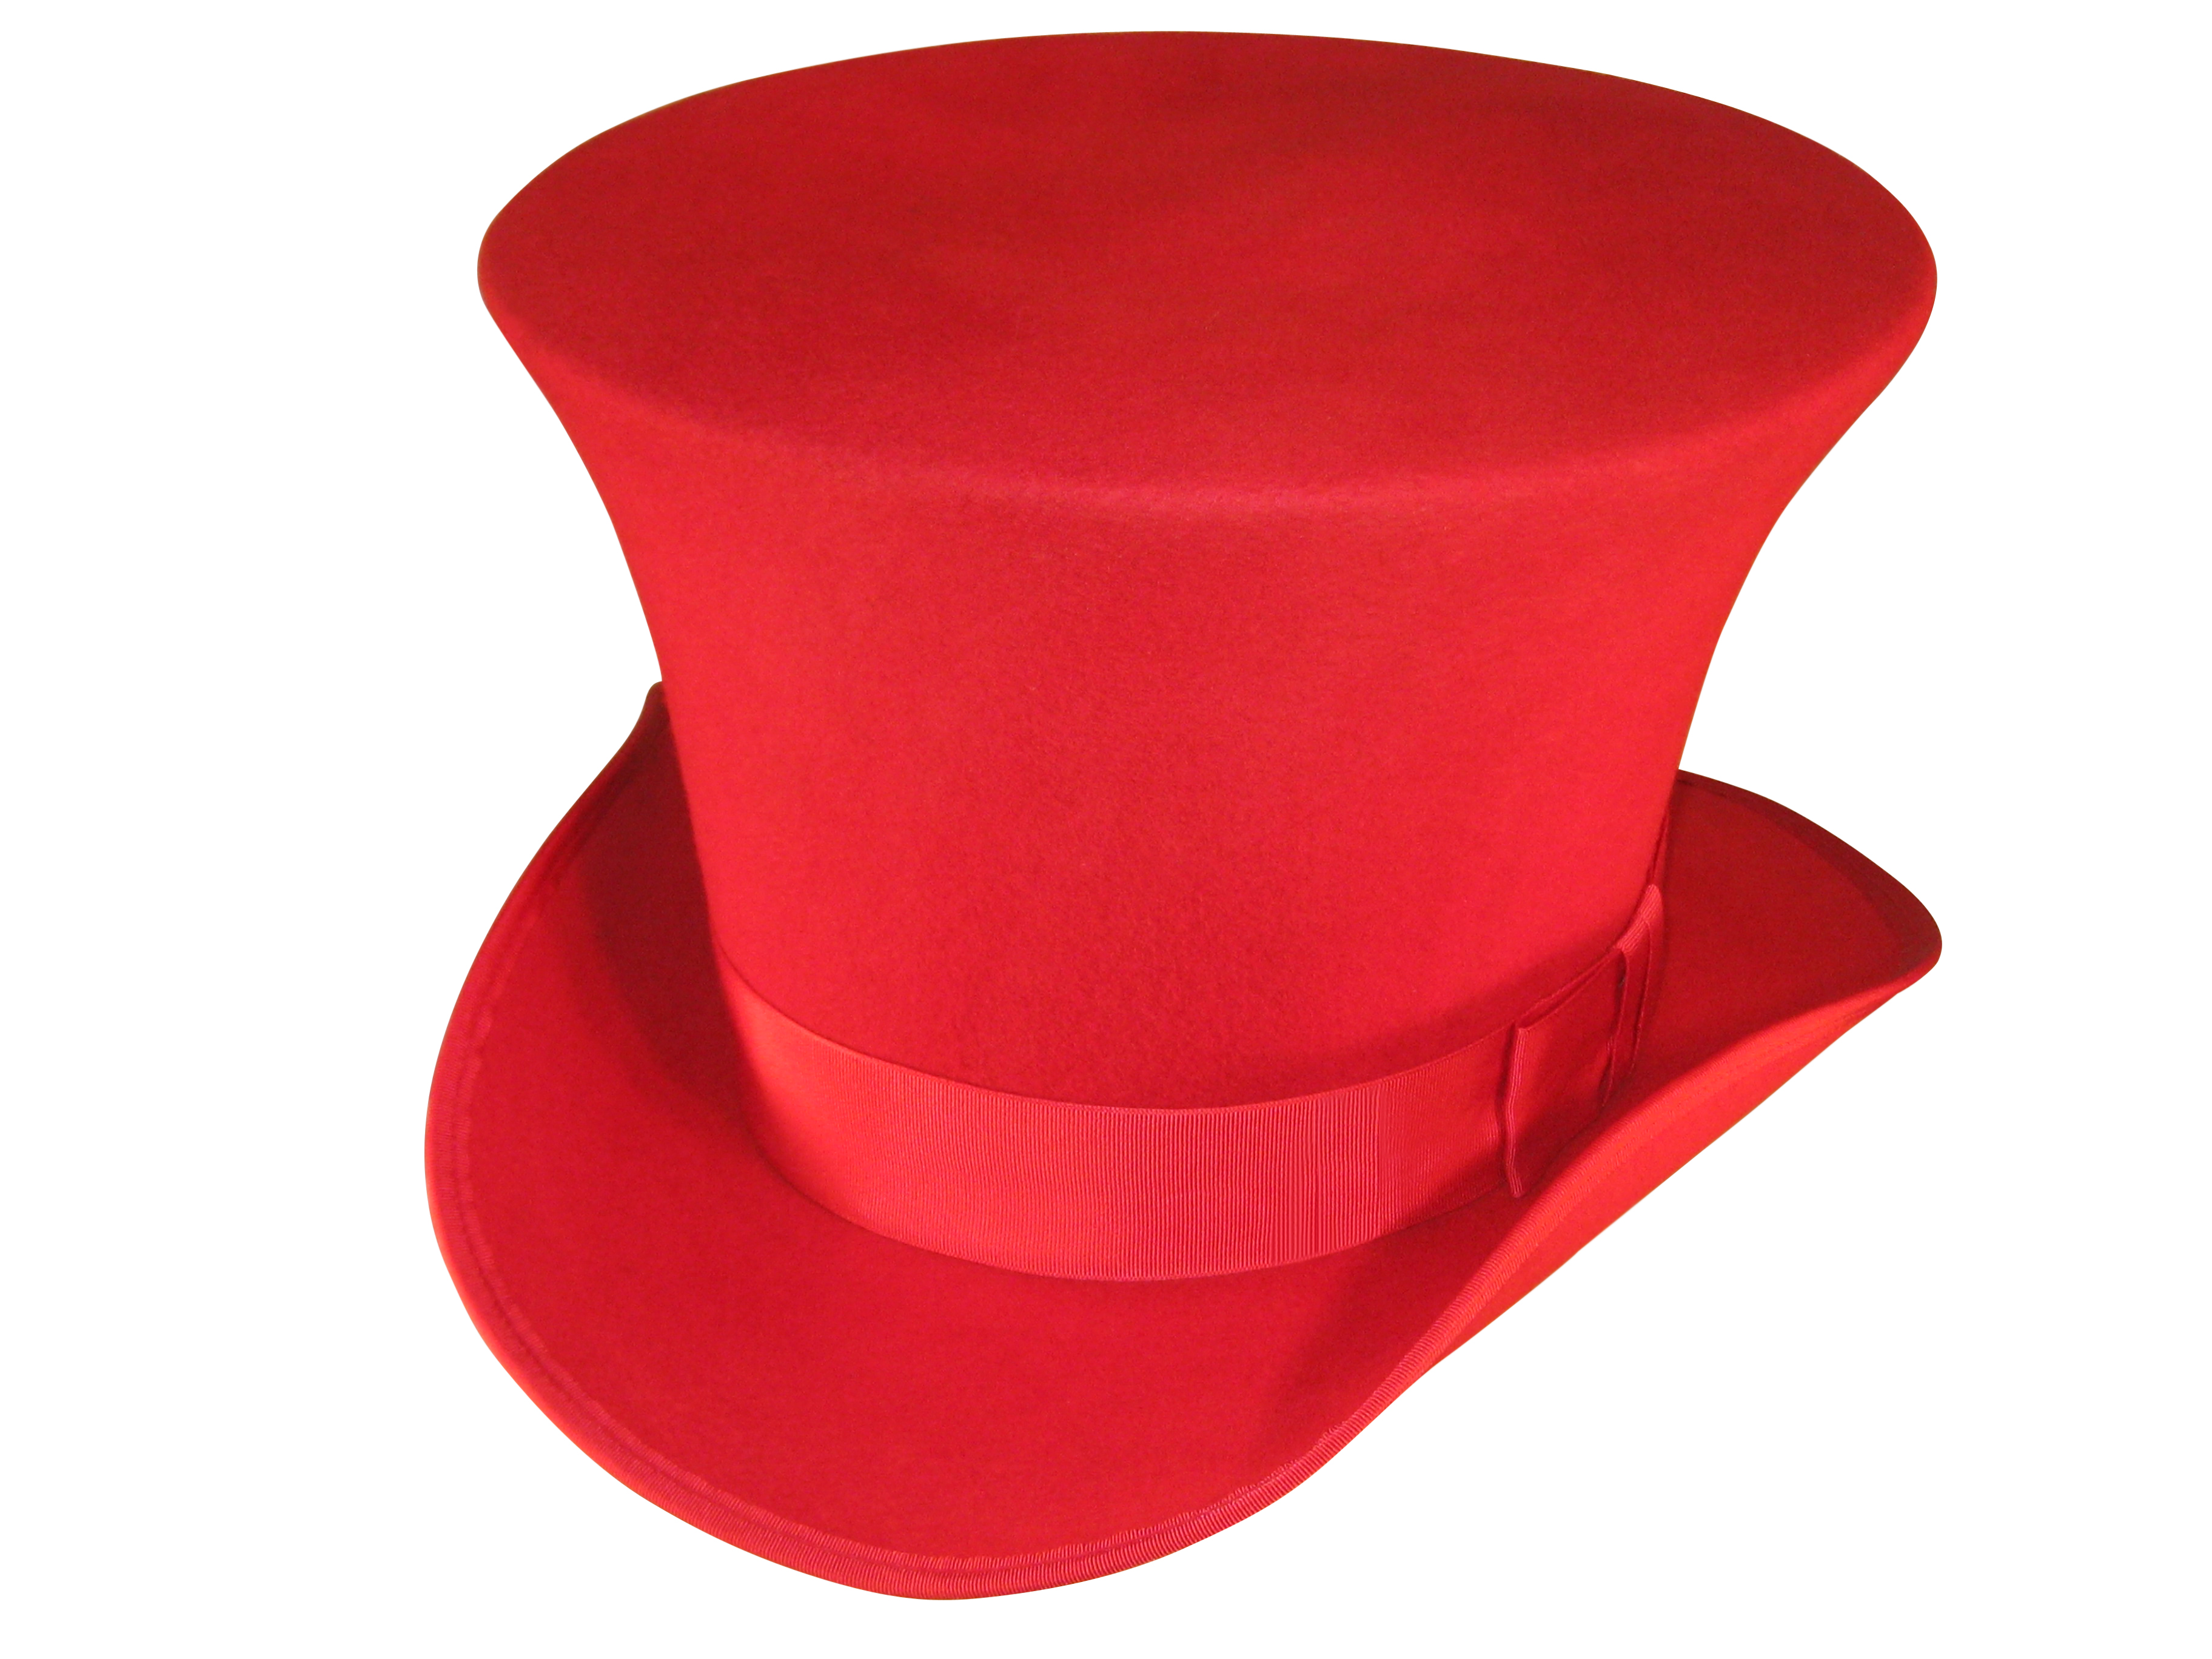 Top Hat Clipart Cartoon Red Top Hat Clipart PNG Image Transparent PNG ...